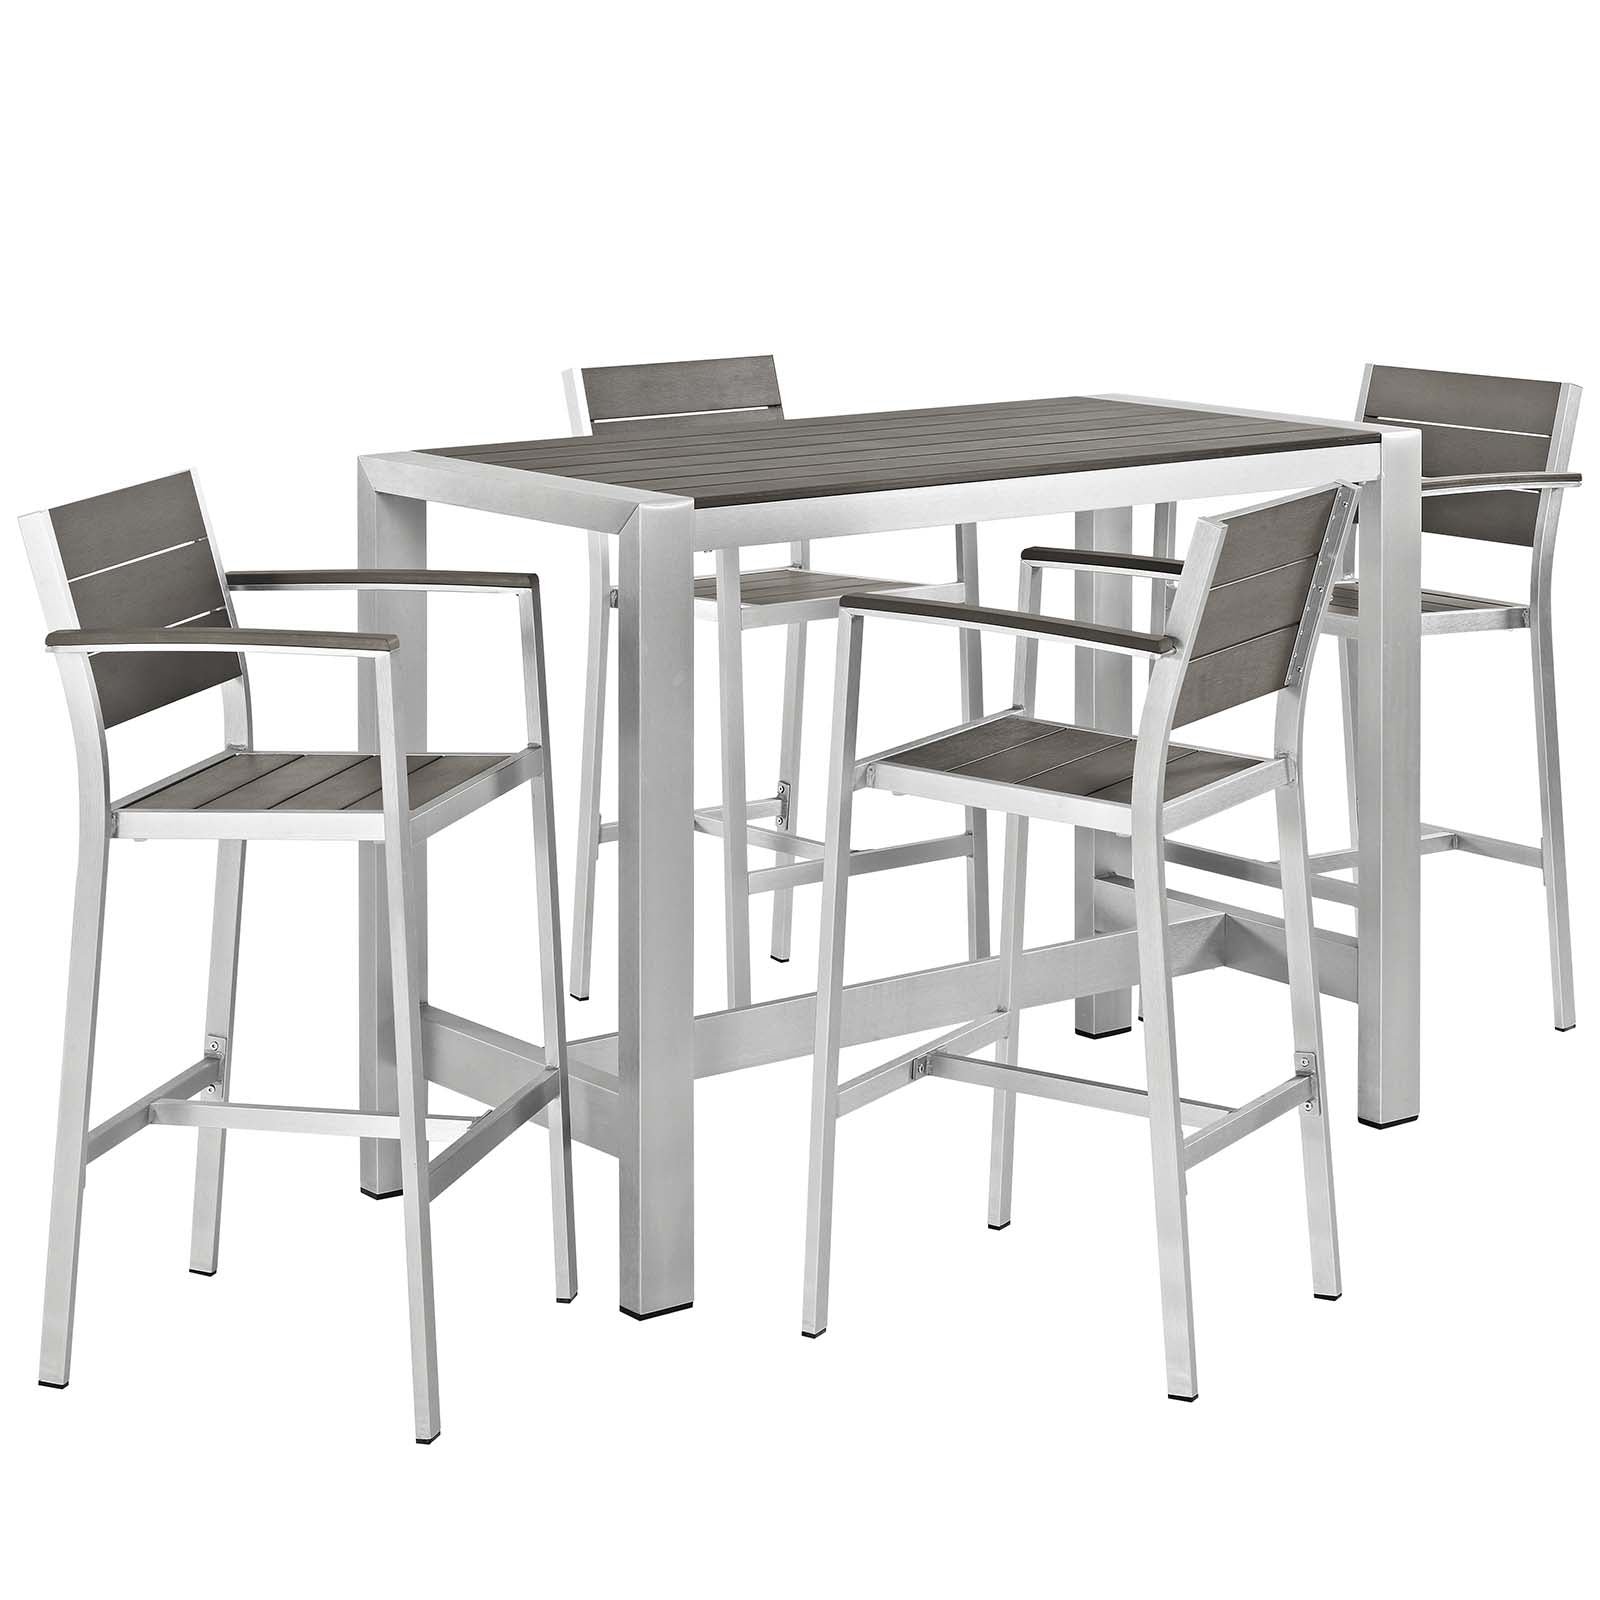 Modway Outdoor Dining Sets - Shore 5 Piece Outdoor Patio Dining Set Silver Gray